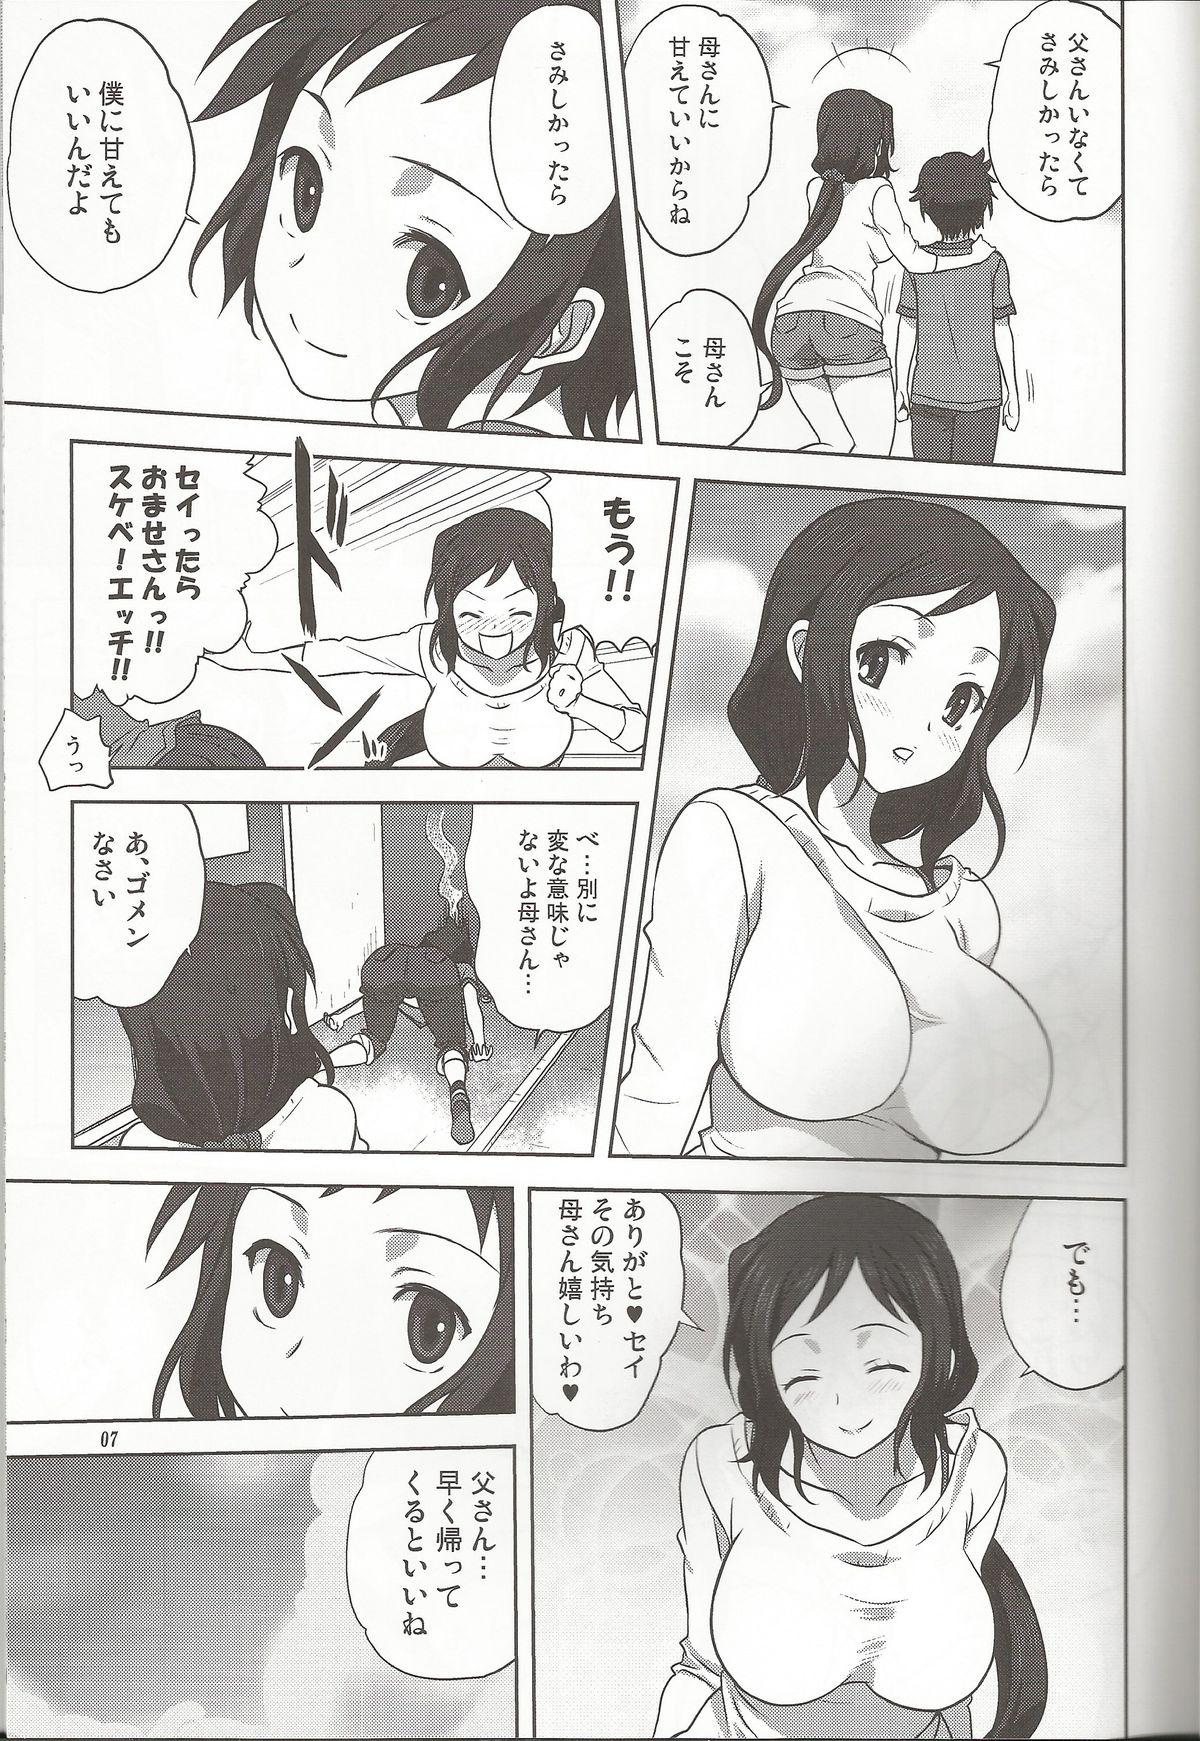 Yanks Featured Rinko-mama to Issho 2 - Gundam build fighters She - Page 6